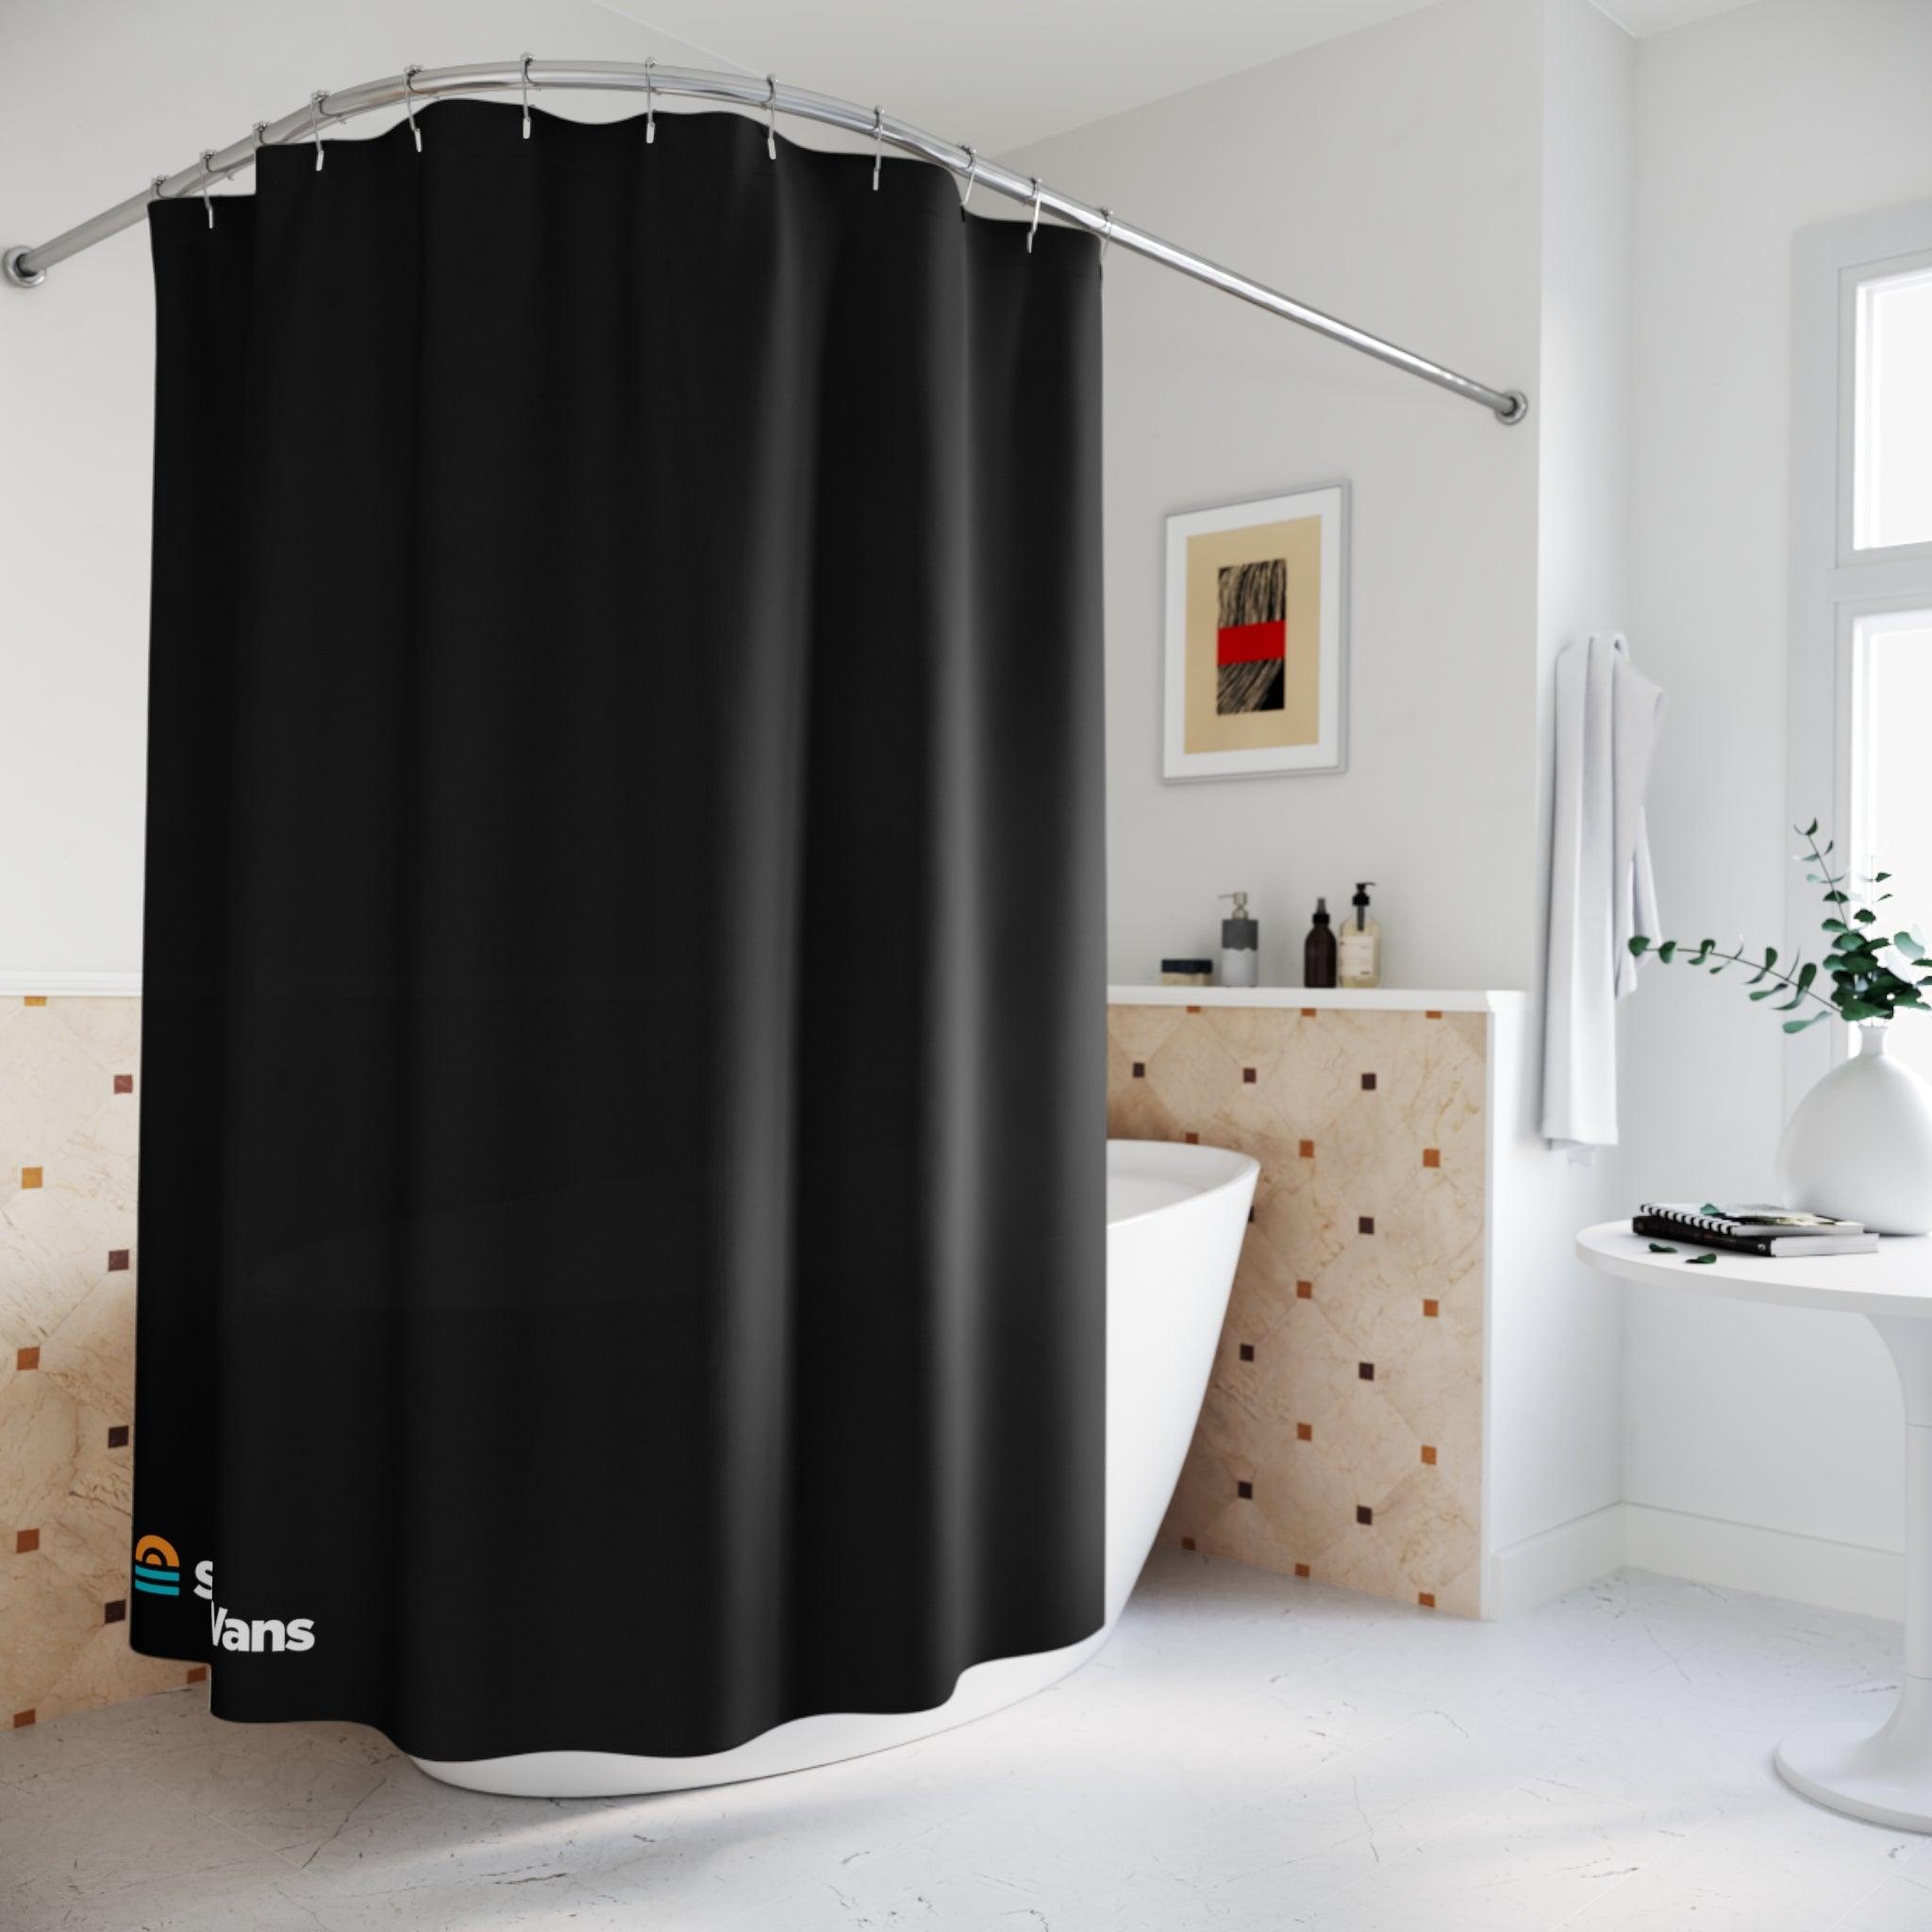 Copy of Polyester Shower Curtain - Sandy Vans